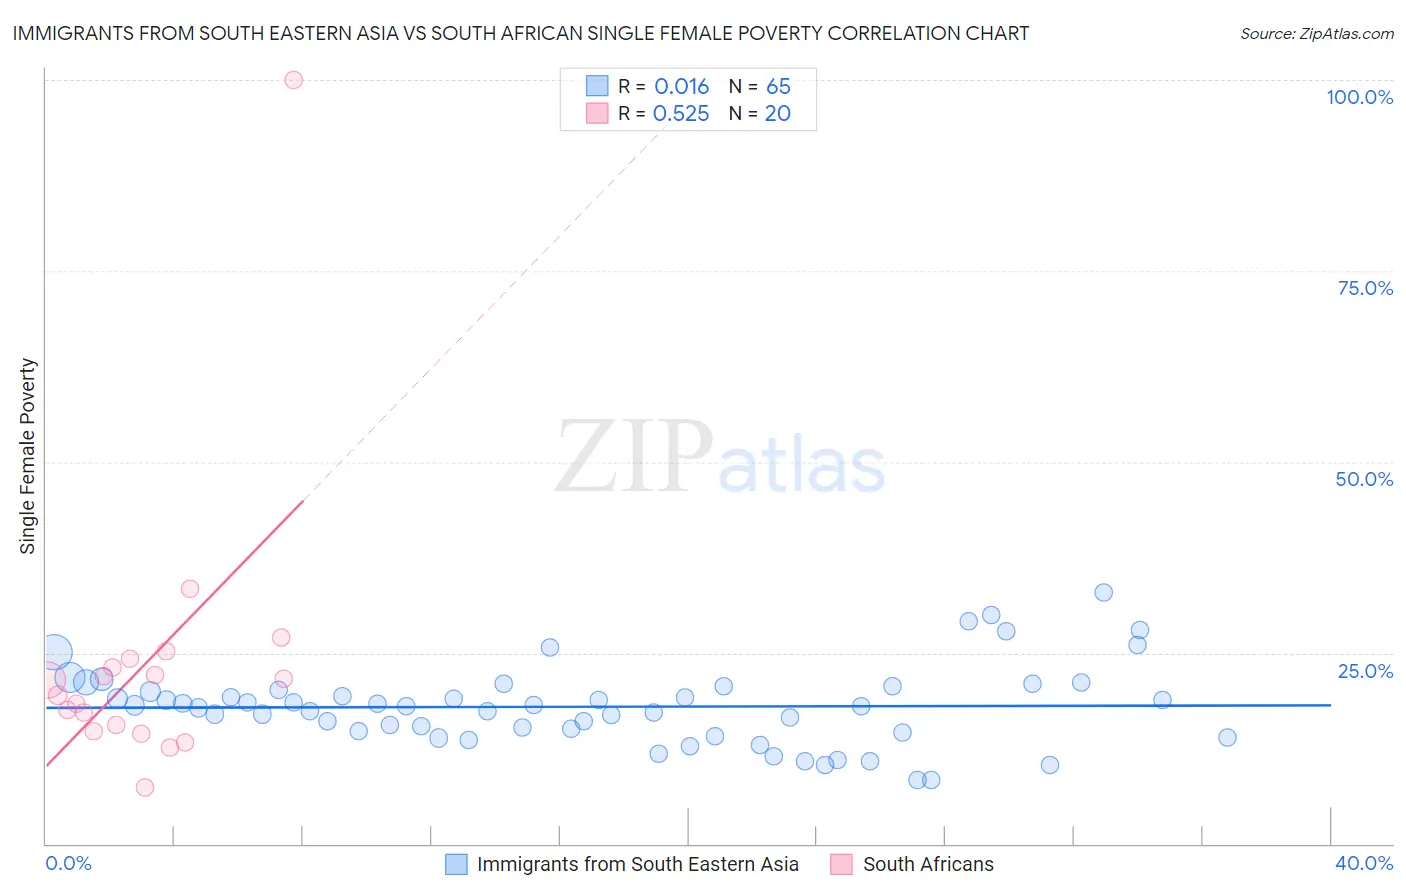 Immigrants from South Eastern Asia vs South African Single Female Poverty